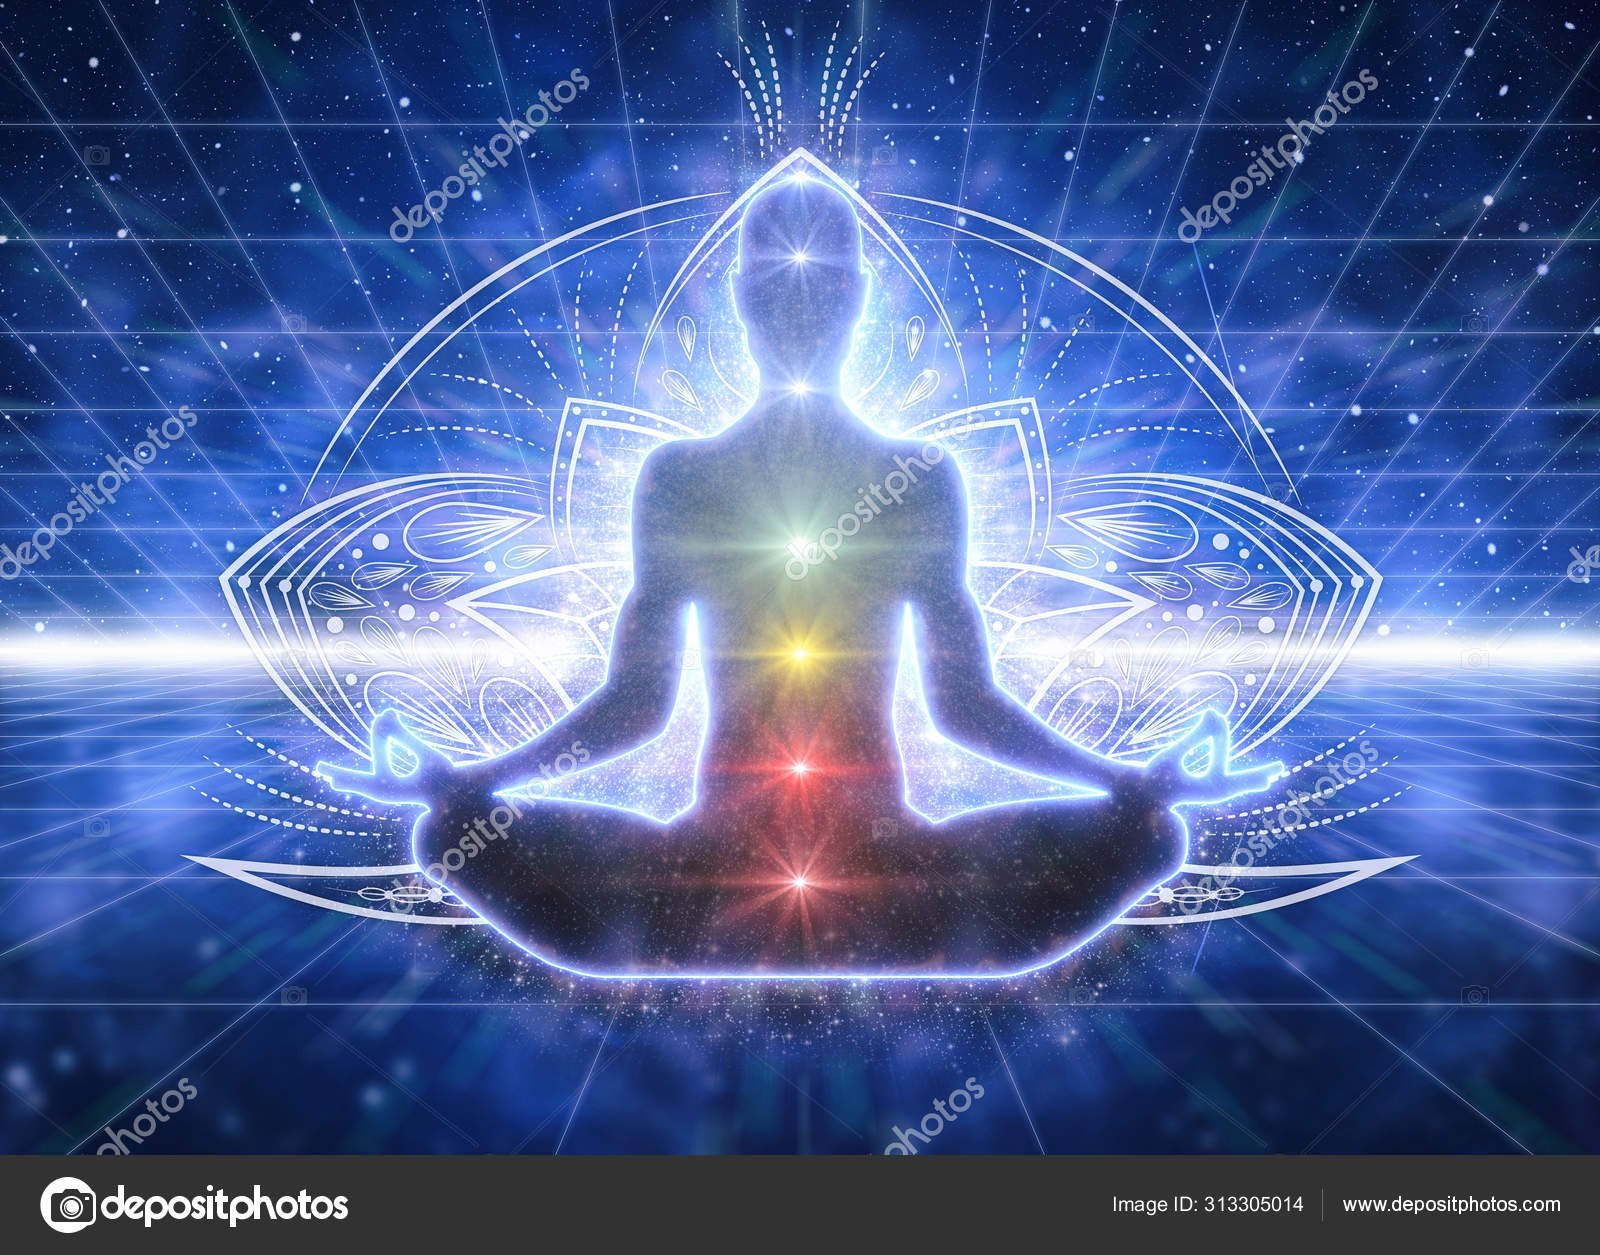 Meditation Abstract Spiritualism Yoga Concept Great Background Image Any  Spiritual Stock Photo by ©Activedia 313305014